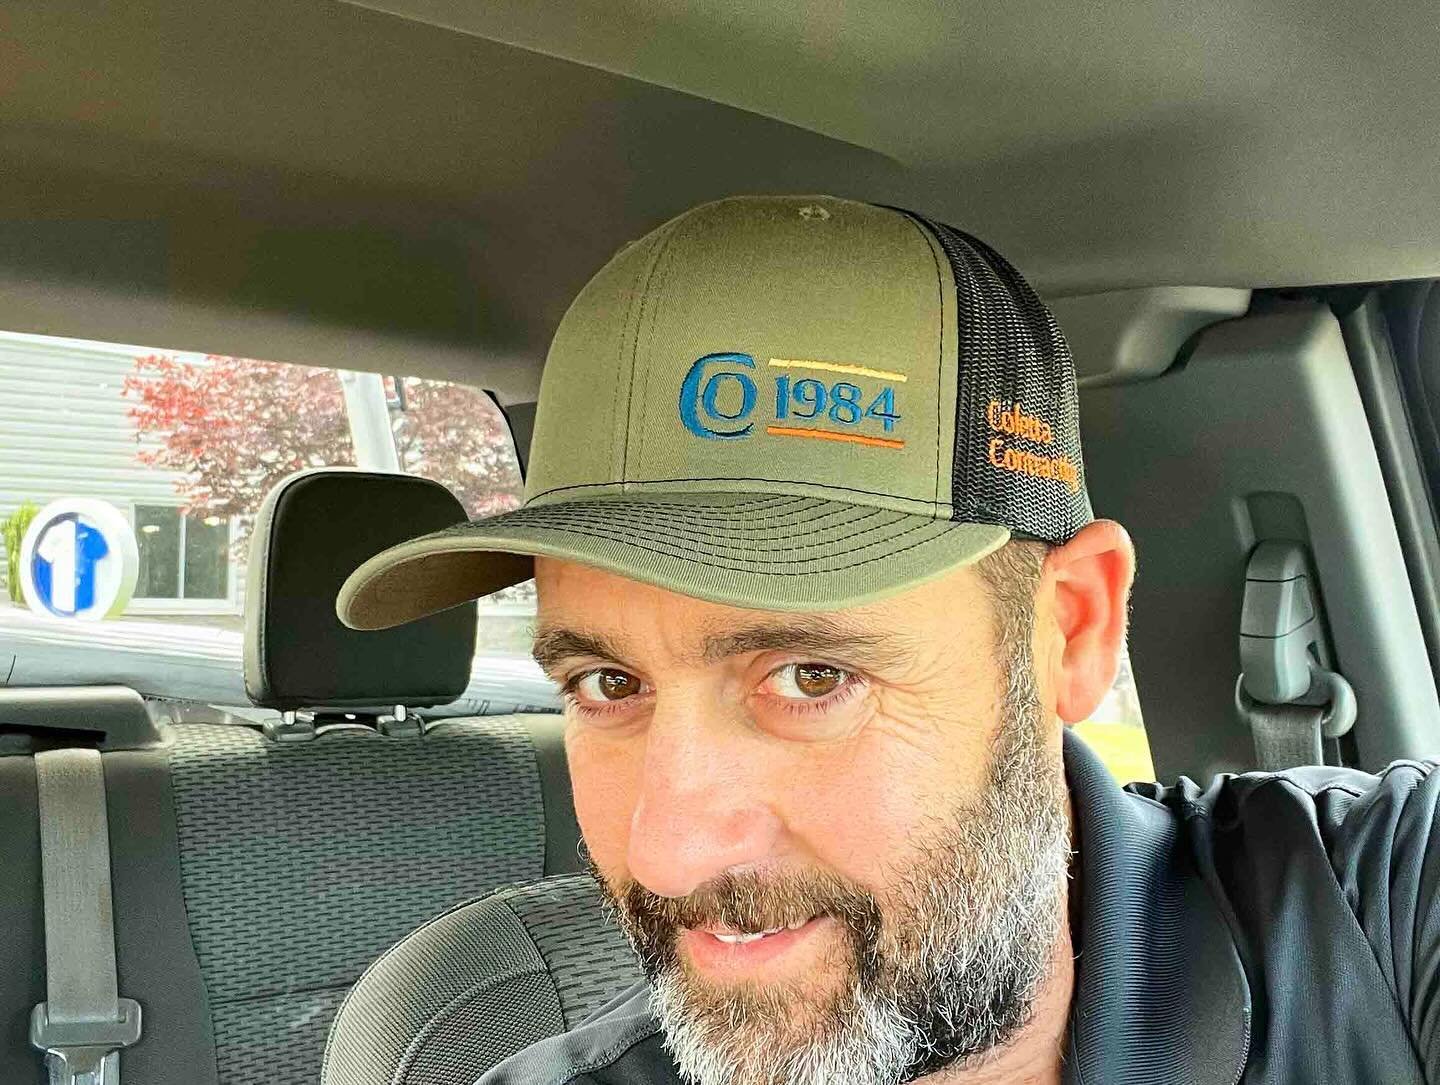 #18of40: At Coletta, we love sporting our #swag.  Justin Coletta is always representing our cool branded hats! These caps are so cool, everyone wants to sport our swag.  Would you like to purchase one of our hats? Let us know in the comments. #WeAreC